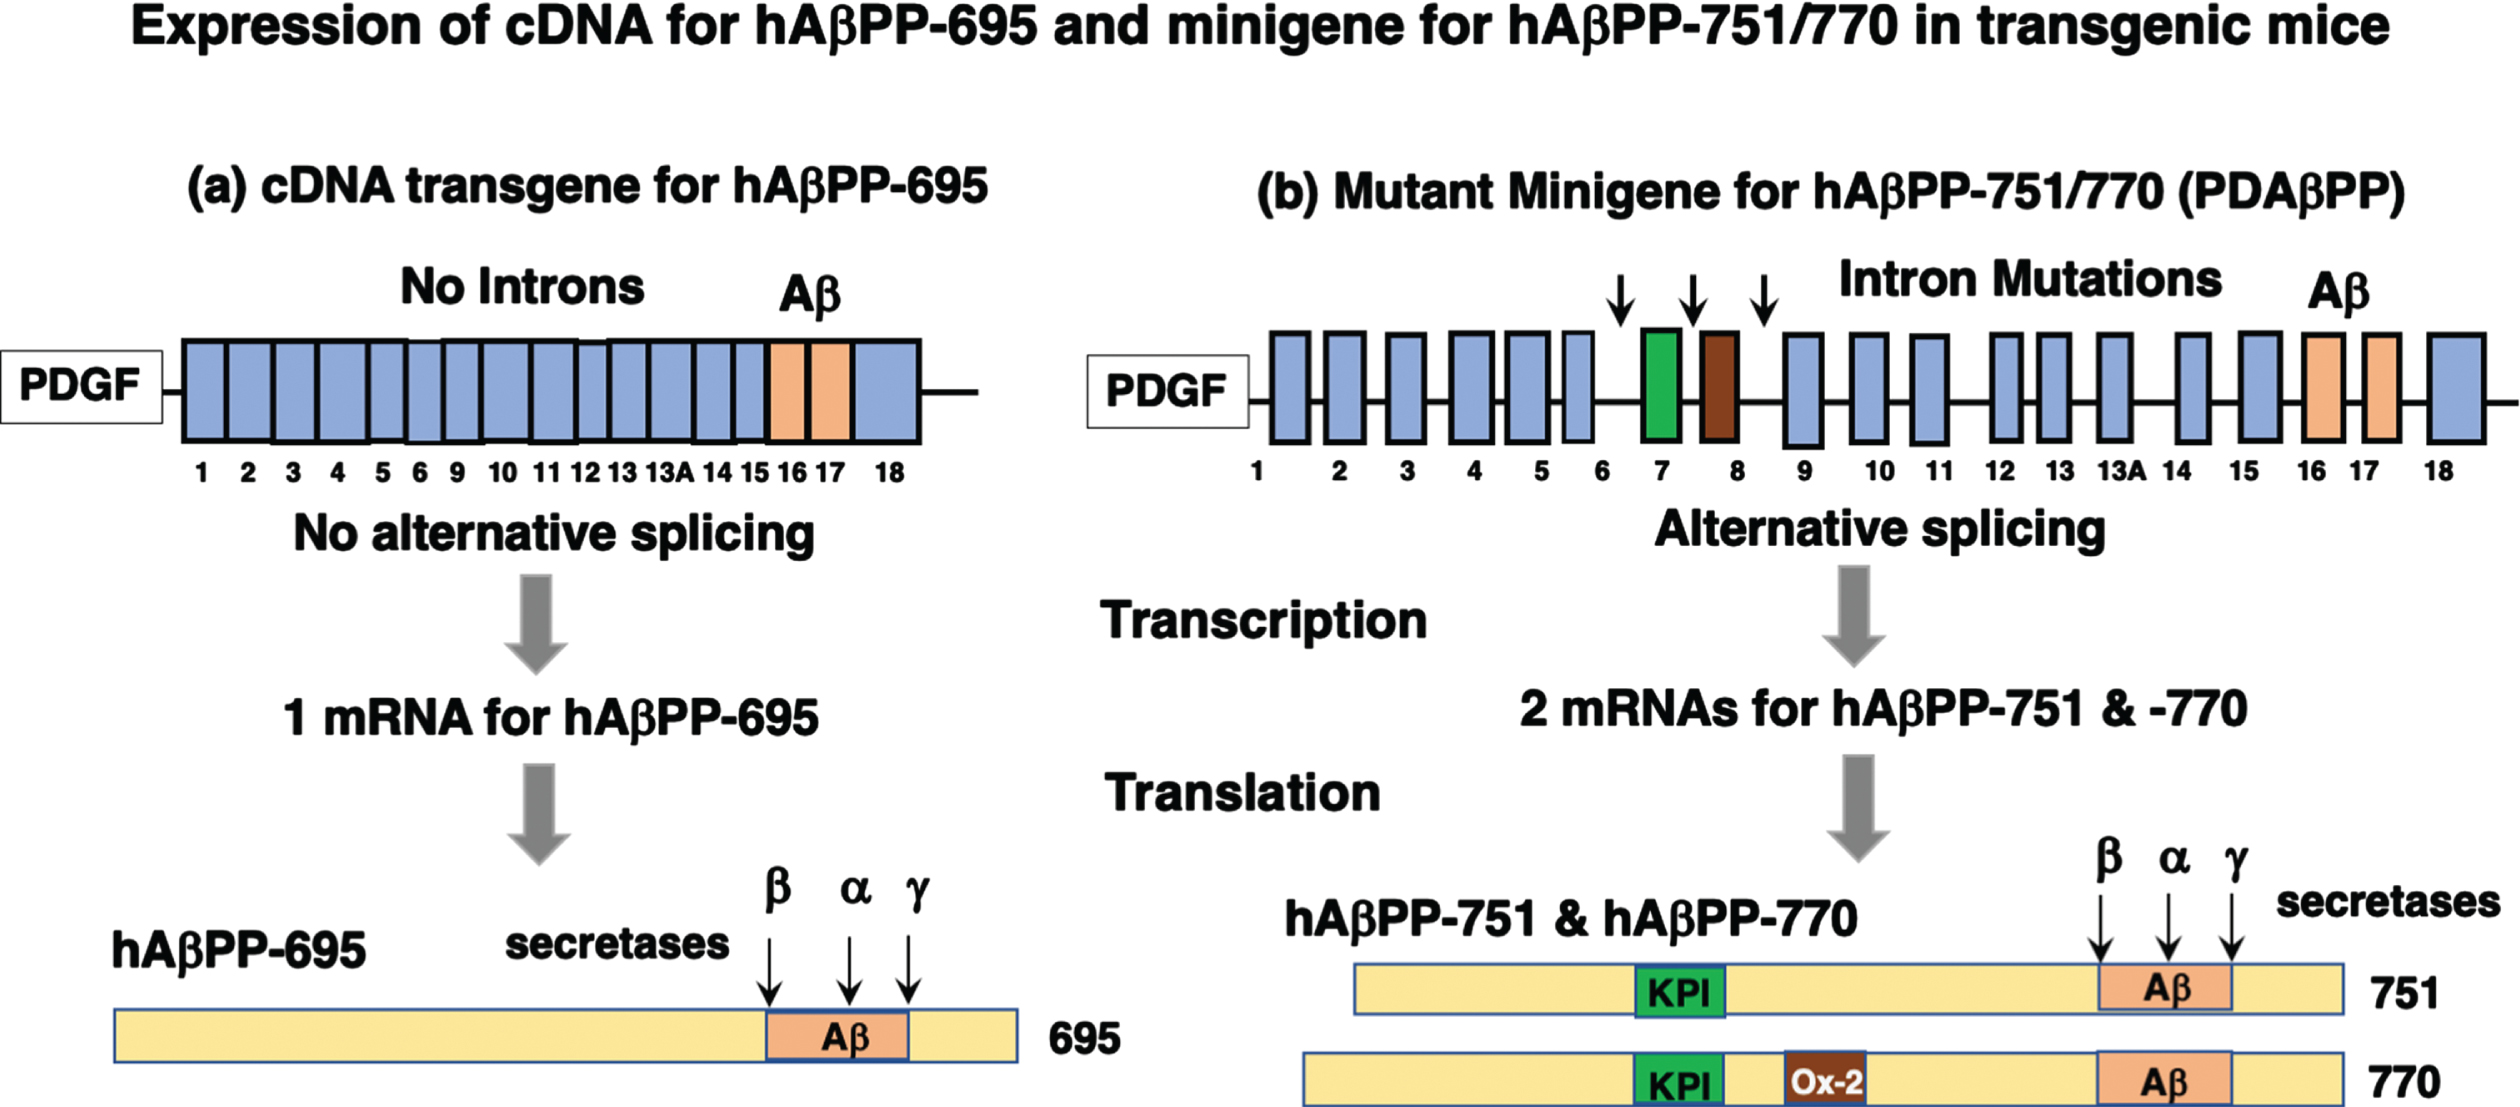 Human AβPP cDNA and minigene expression of hAβPP-695 and hAβPP-751/770 isoforms. (a) cDNA expression of hAβPP-695. The Hook group expressed the cDNA of hAβPP-695 in mouse studies of CTSB KO [7, 10, 15]. (b) Mutant minigene expression of hAβPP-751/770. In contrast, the Gan group expressed a minigene of hAβPP-751/770 with mutations in introns between exons 6 and 9 (indicated by arrows) [16, 17, 23]. The minigene produced multiple RNAs, underwent alternative splicing, and produced 45.8% hAβPP-770, 46.7% hAβPP-751 and 7.5% hAβPP-695 [23]. But normal brain produces much higher levels of hAβPP-695 than hAβPP-751/770 [21, 24].